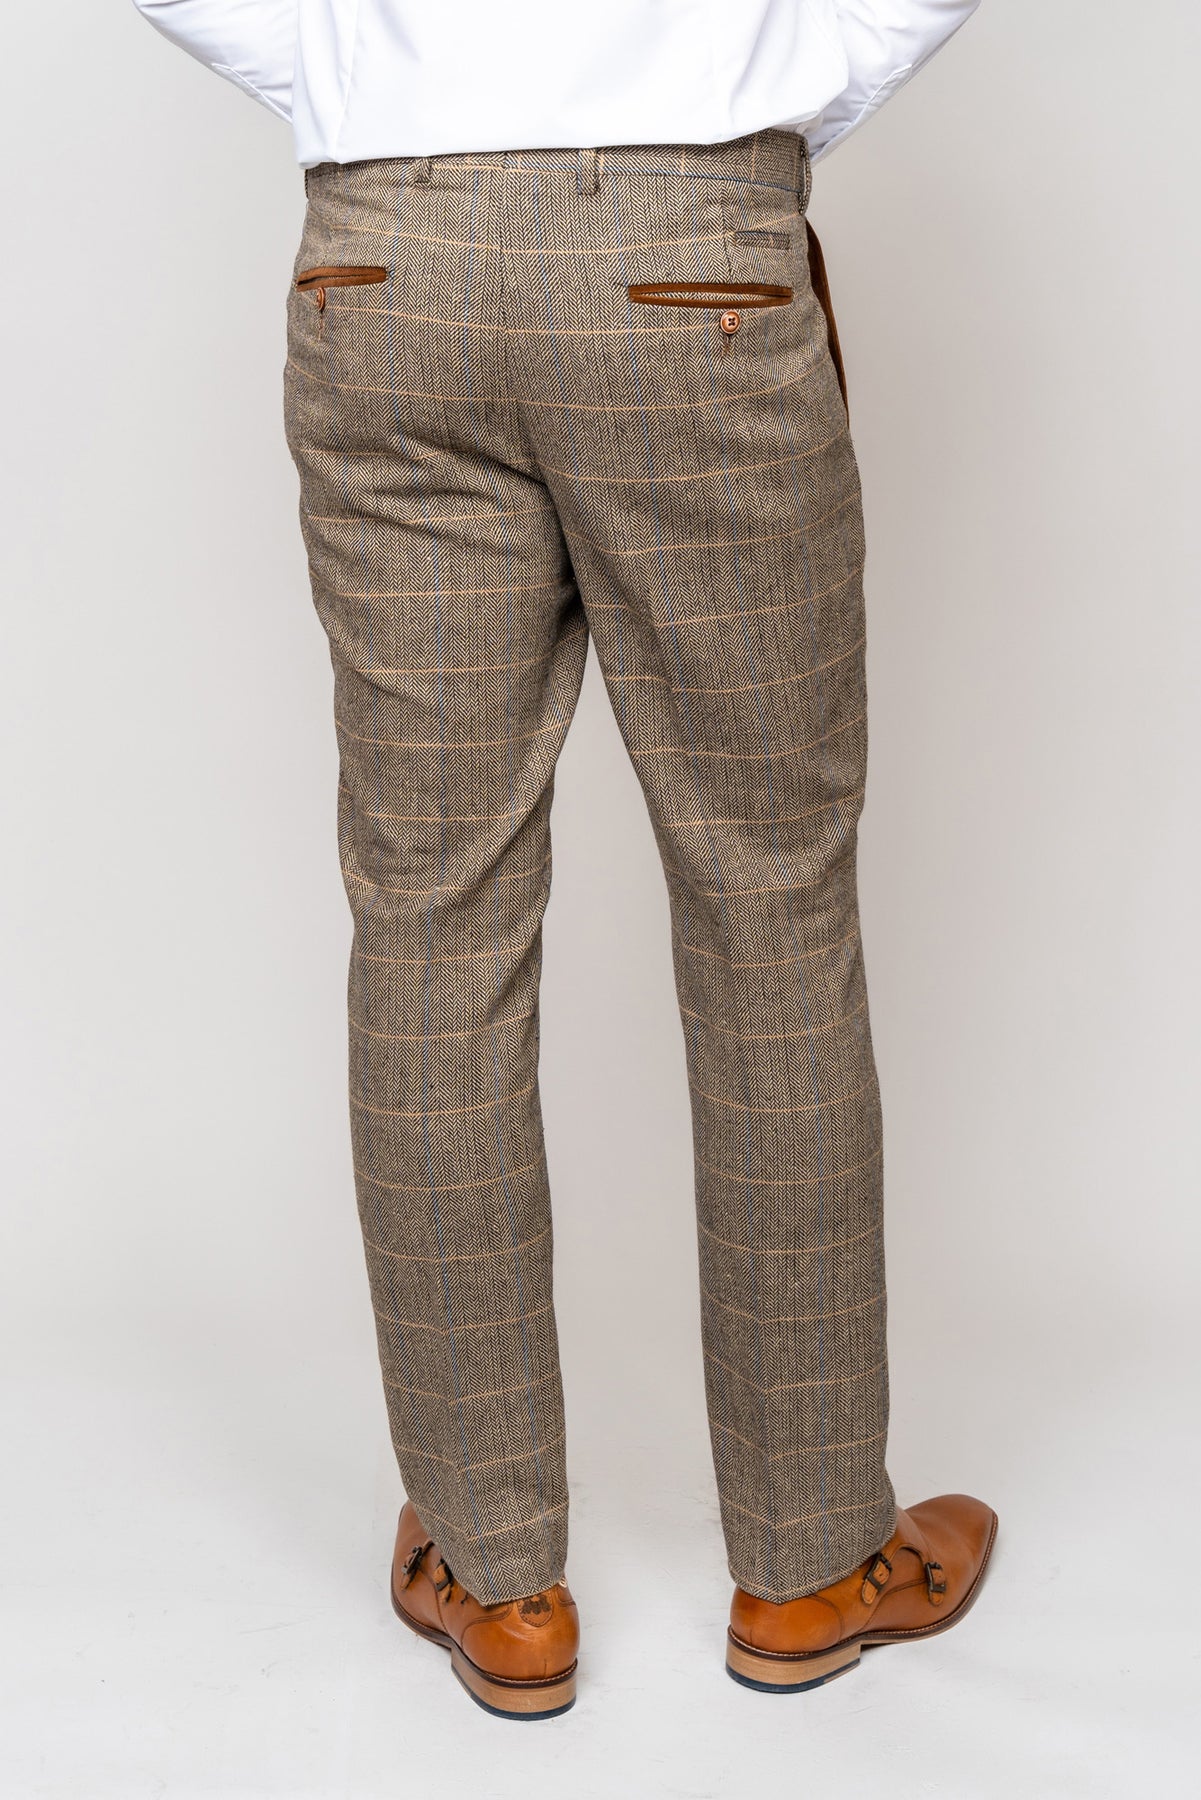 Marc Darcy - Ted Tan Tweed Trousers - Furbellow & Co